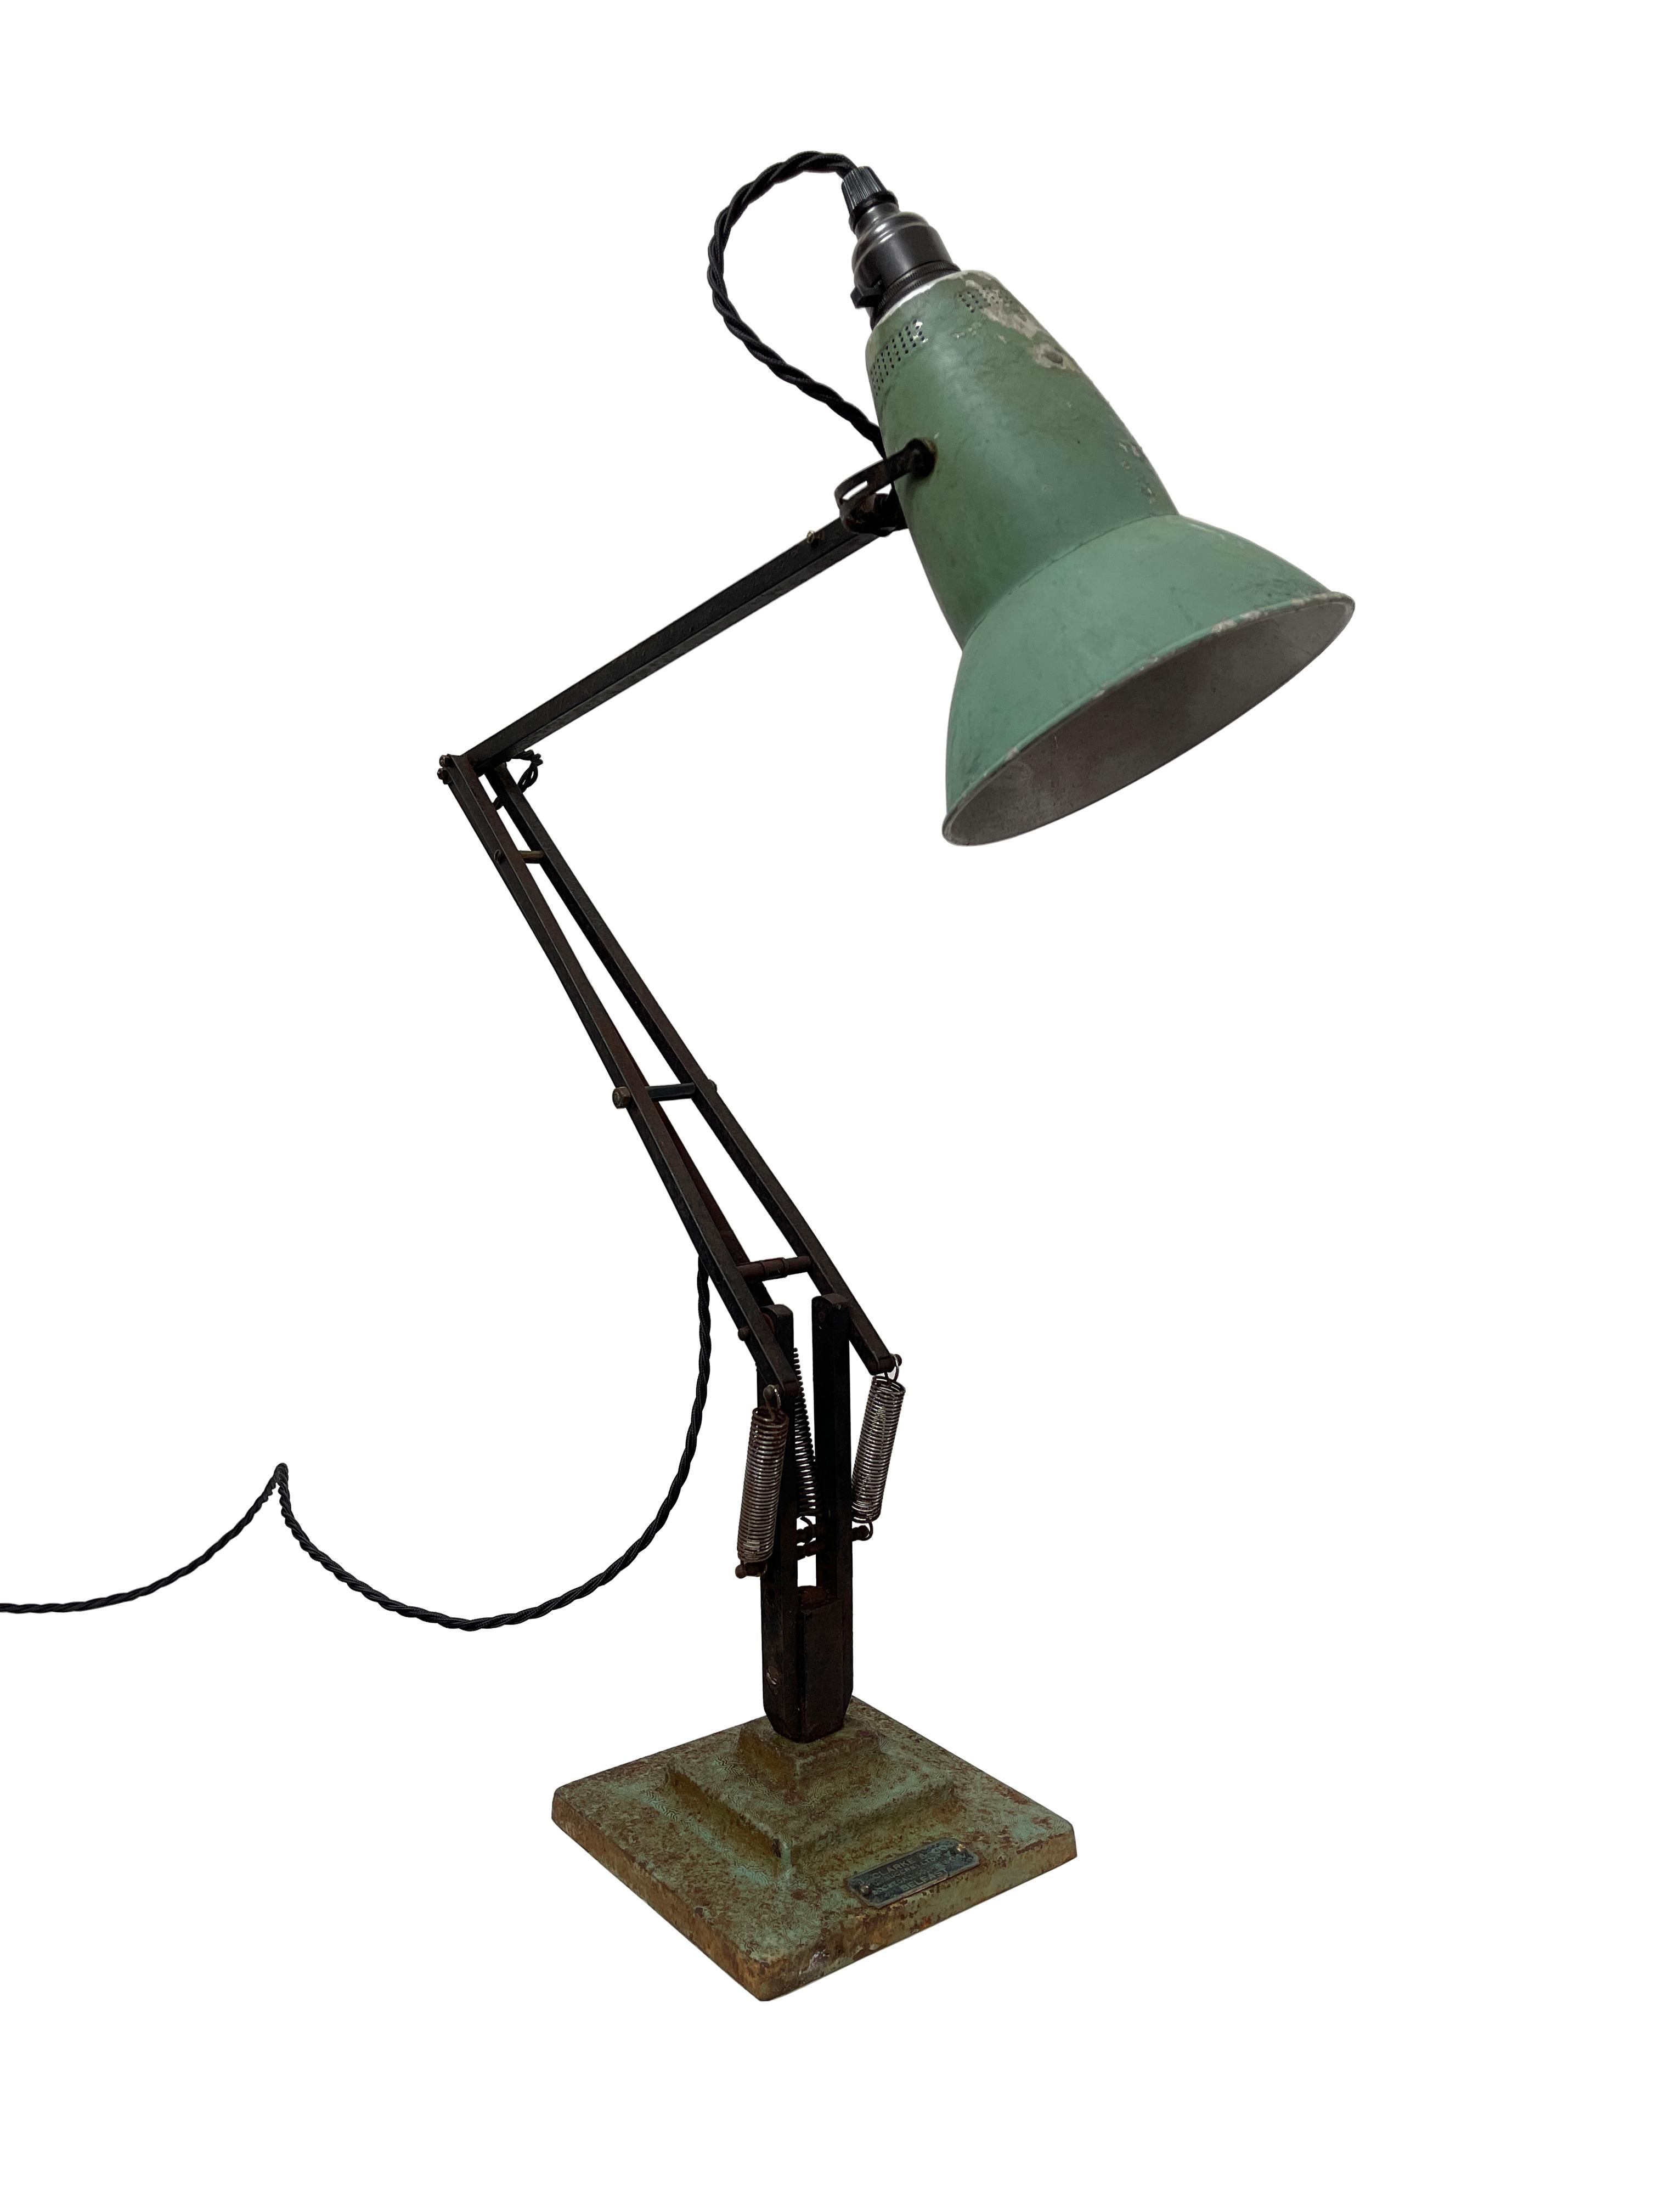 - An all original Mk 1 three step Herbert Terry Anglepoise 1227 desk lamp, English circa 1930. 
- One of the rarest and most sought after models in the Herbert Terry range and with original factory paint, this is a very early example having no